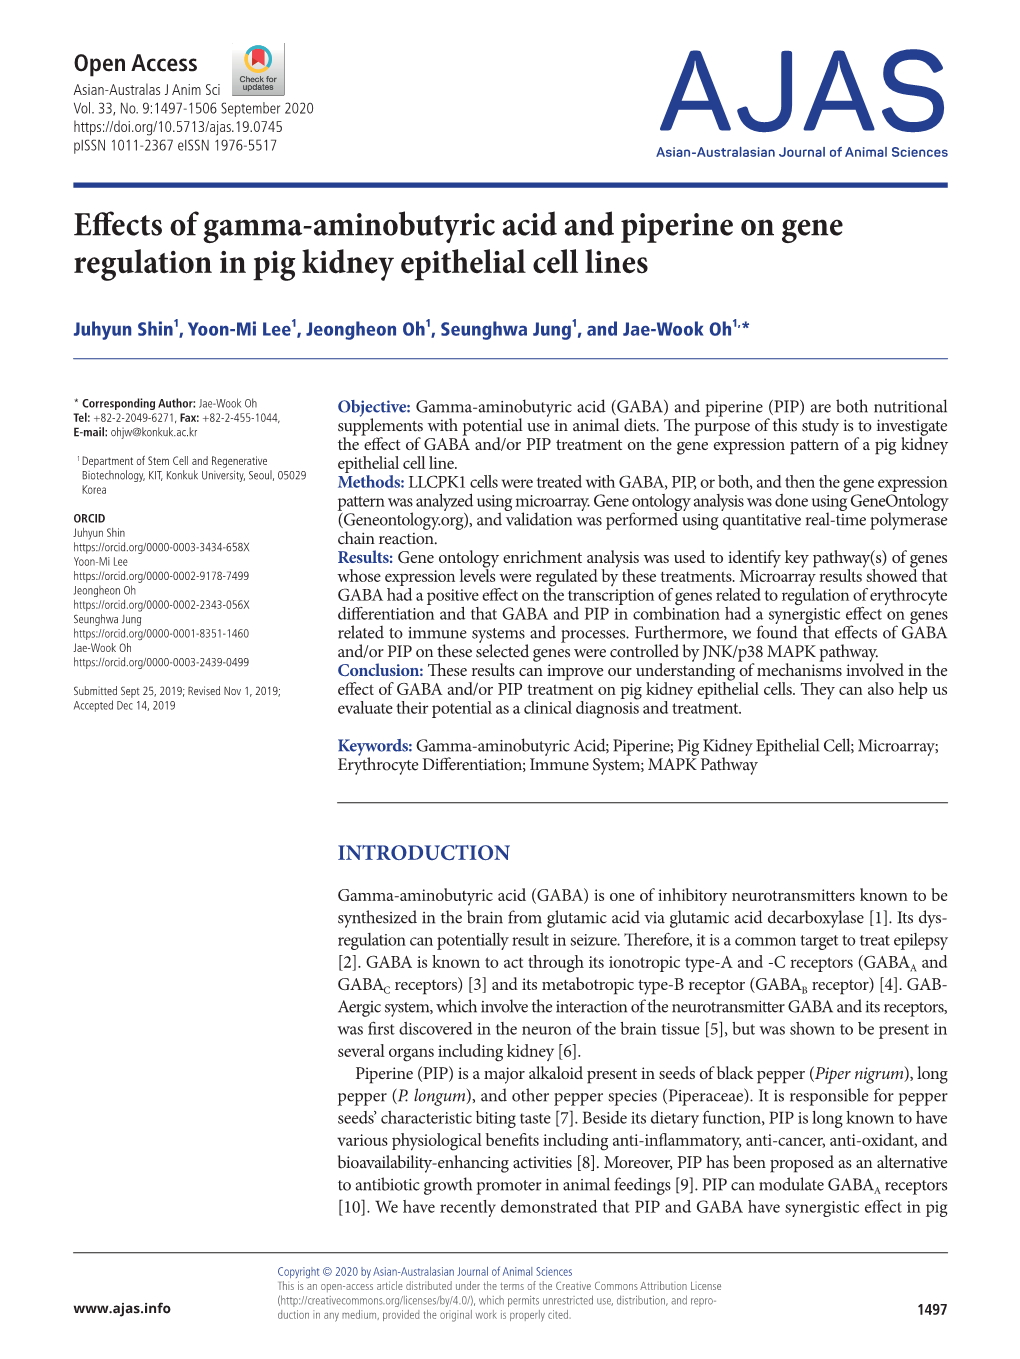 Effects of Gamma-Aminobutyric Acid and Piperine on Gene Regulation in Pig Kidney Epithelial Cell Lines